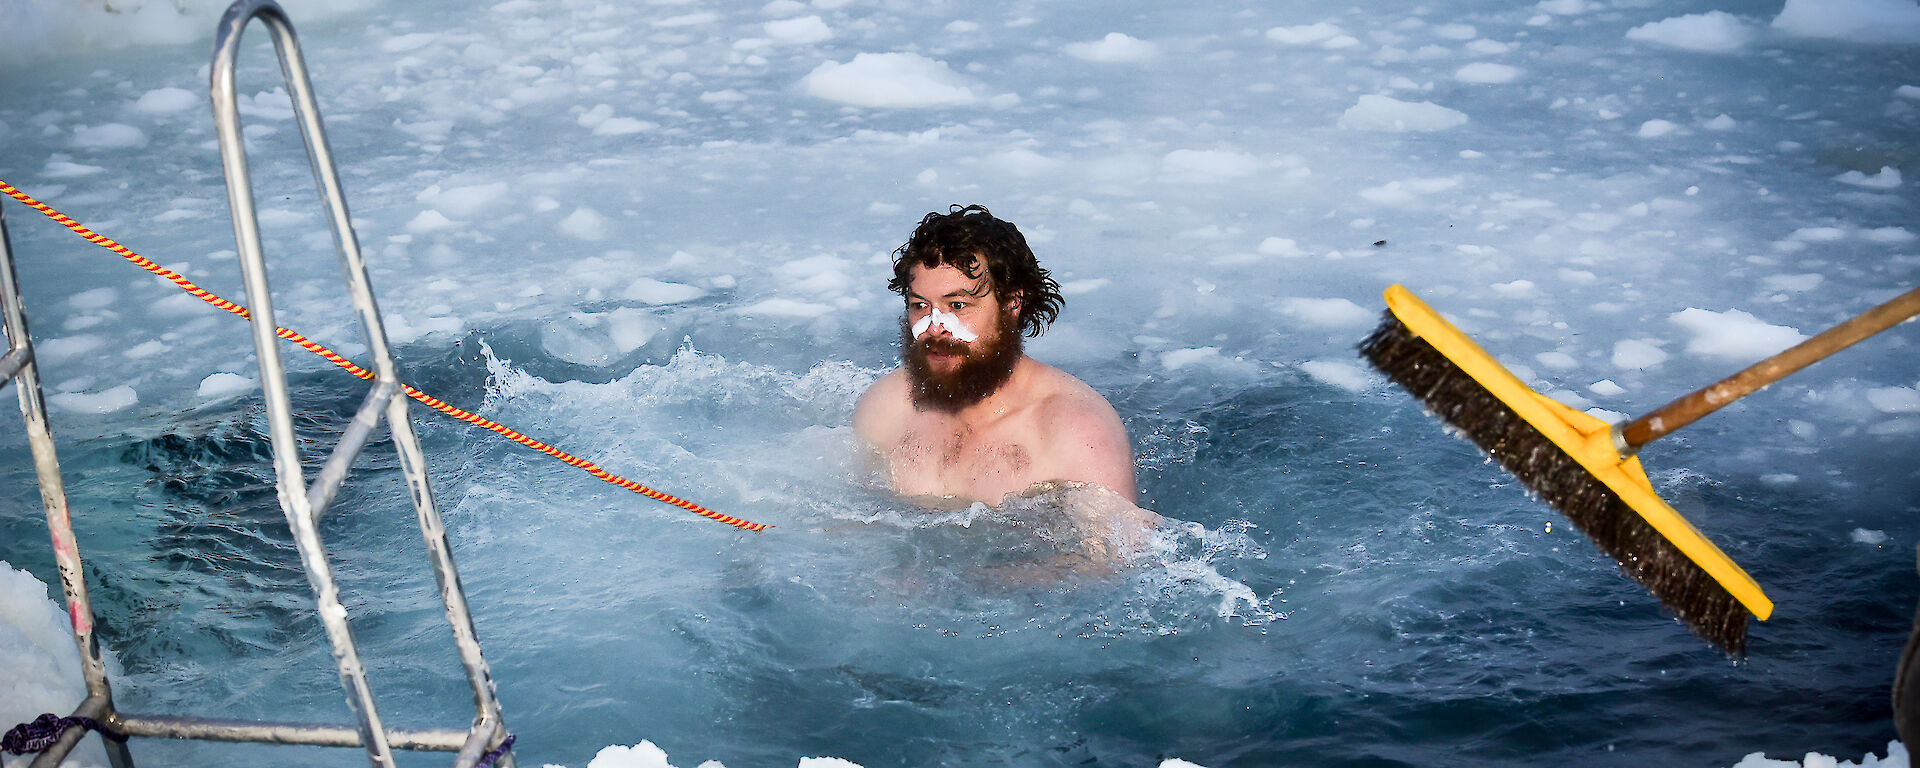 Expeditioner takes midwinter swim in a hole in the ice.